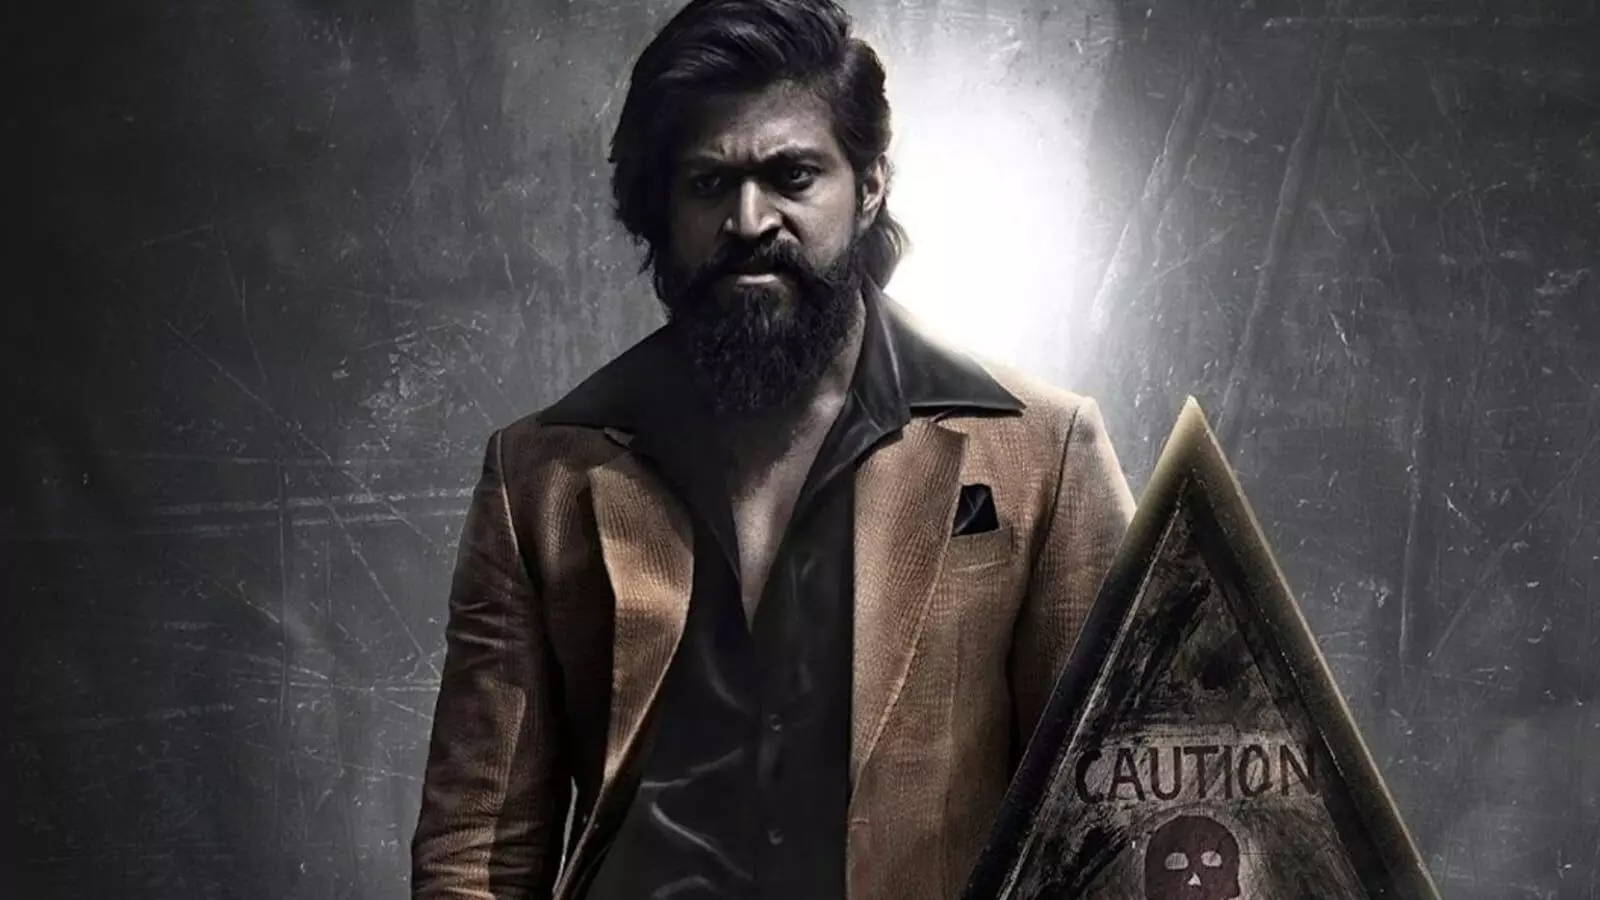 KGF 2 Box Office: Yashs film Stood 7th Among Highest Grossing Indian Movies